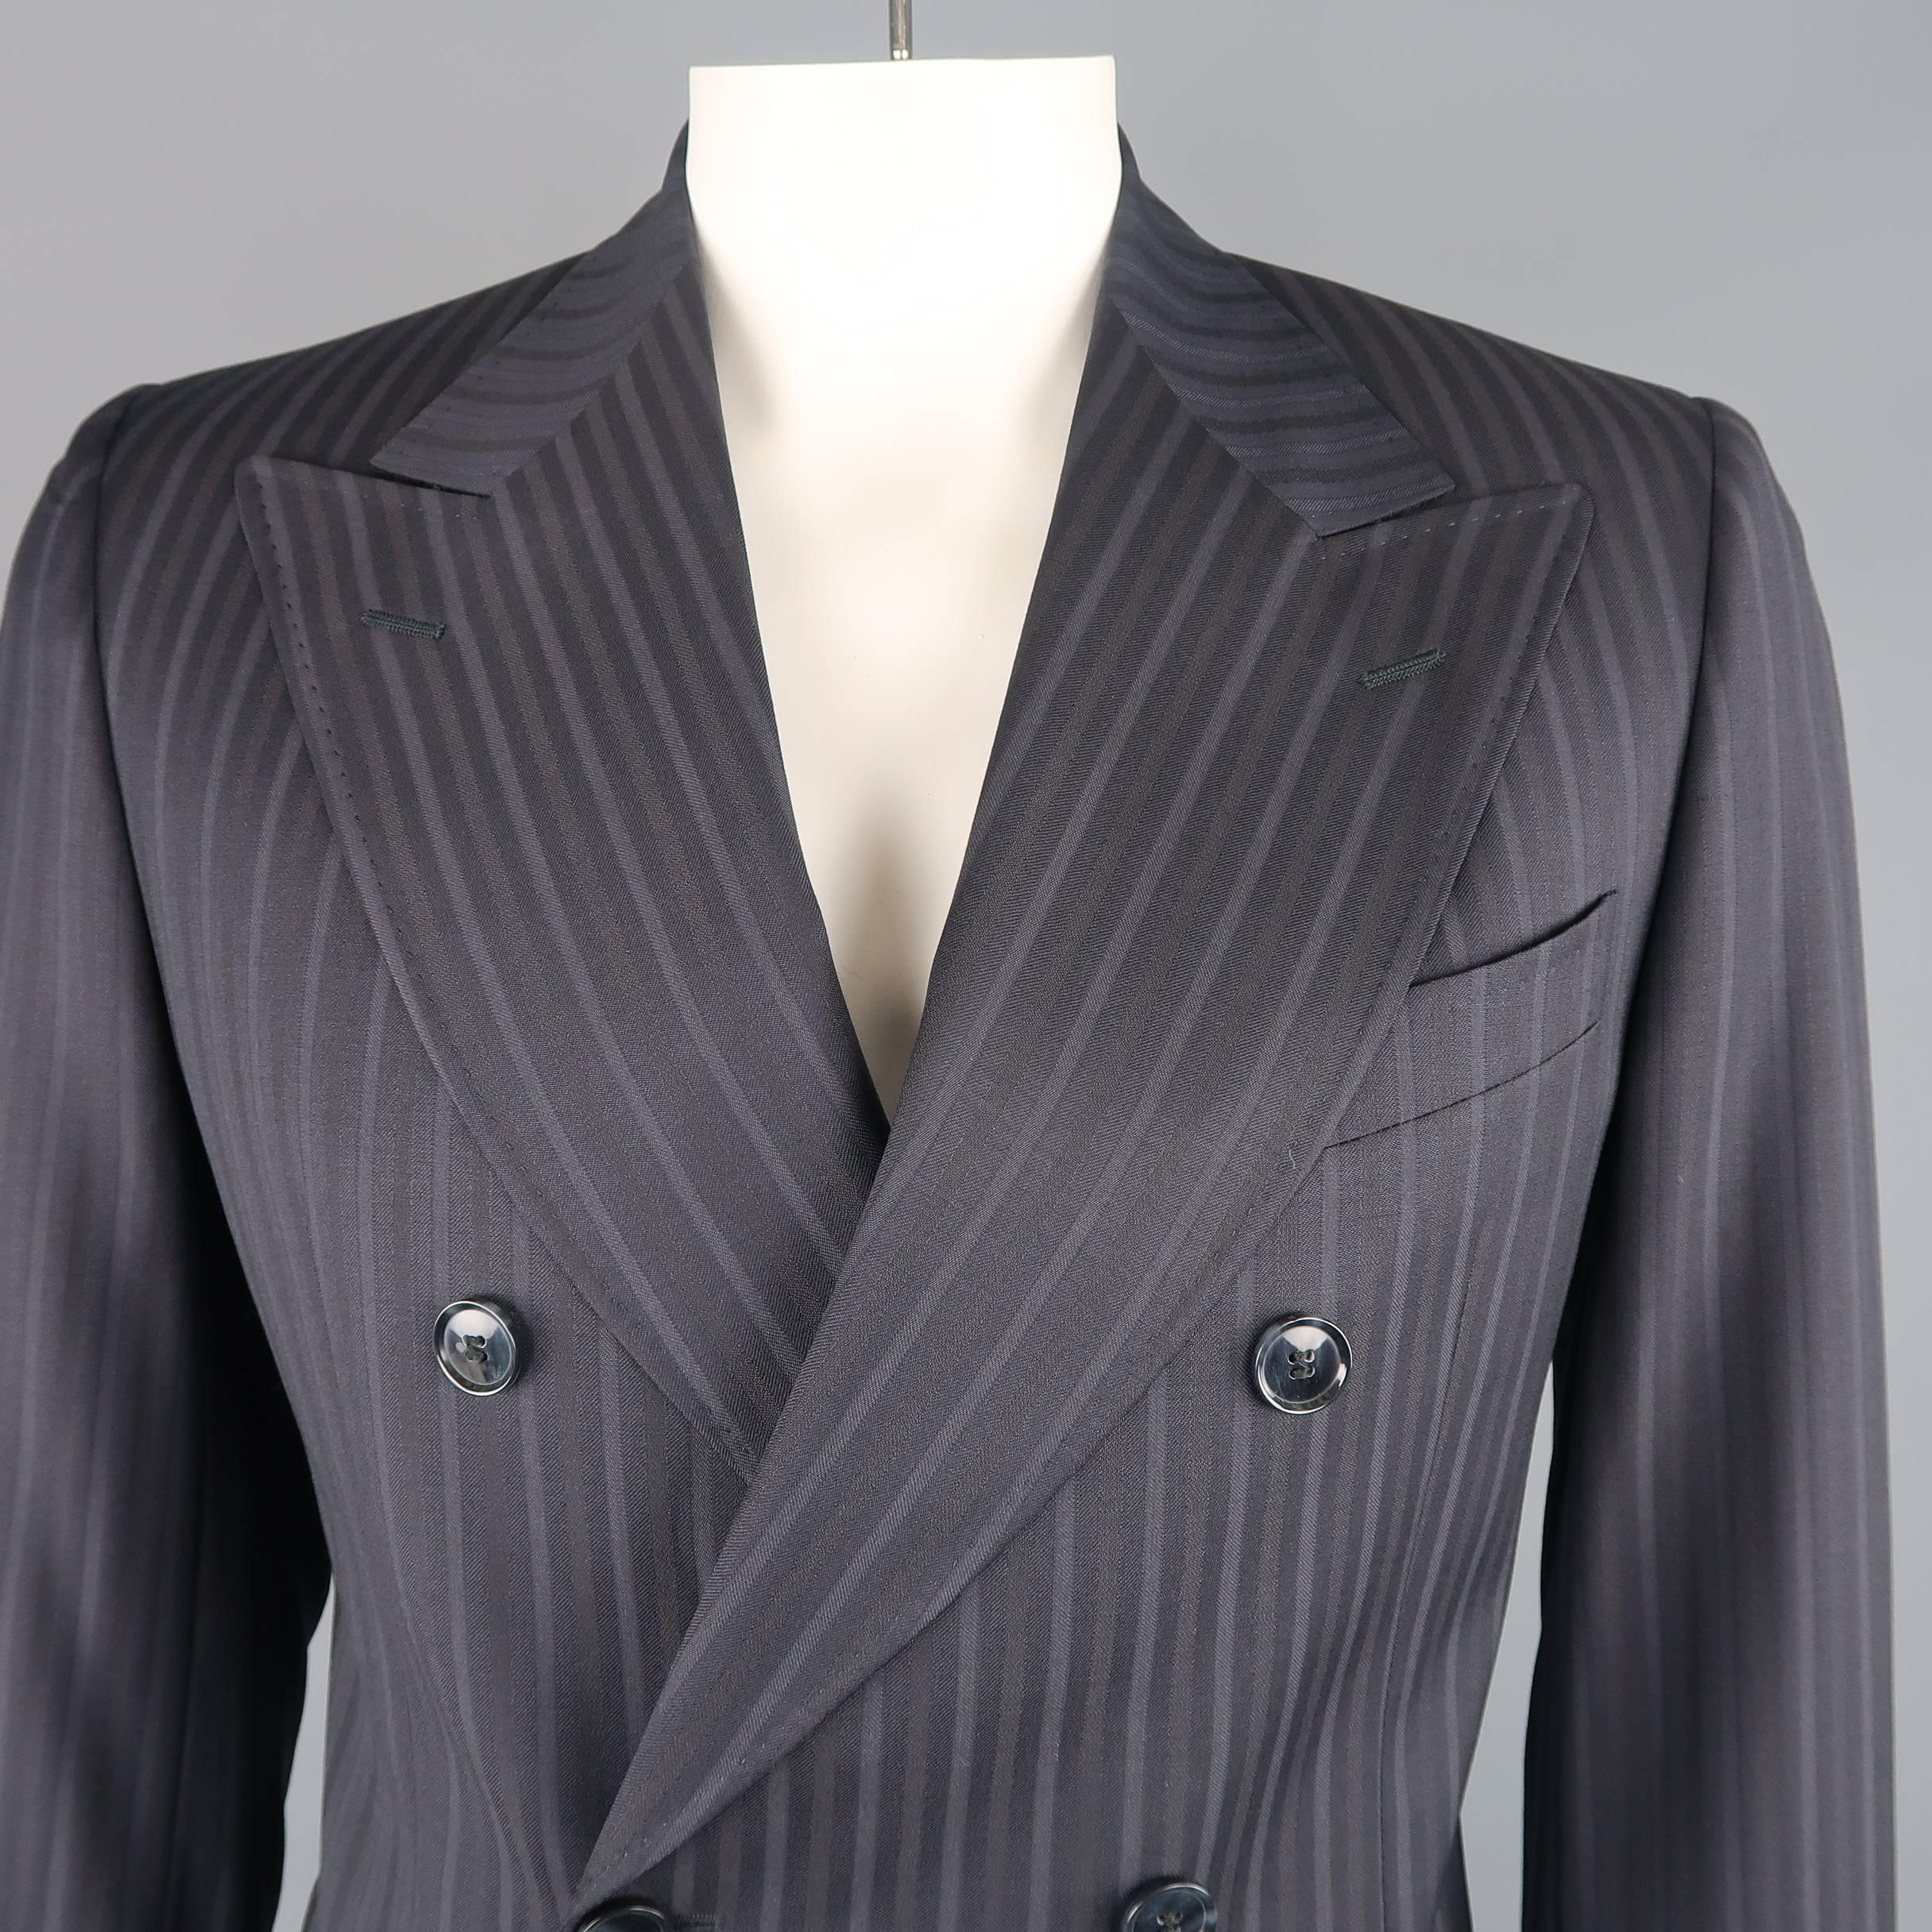 Double breasted DOLCE & GABBANA sport coat comes in navy striped wool with a wide peak lapel, two button closure, and functional button cuffs. Made in Italy.
 
Excellent Pre-Owned Condition.
Marked: IT 52
 
Measurements:
 
Shoulder: 17 in.
Chest: 44